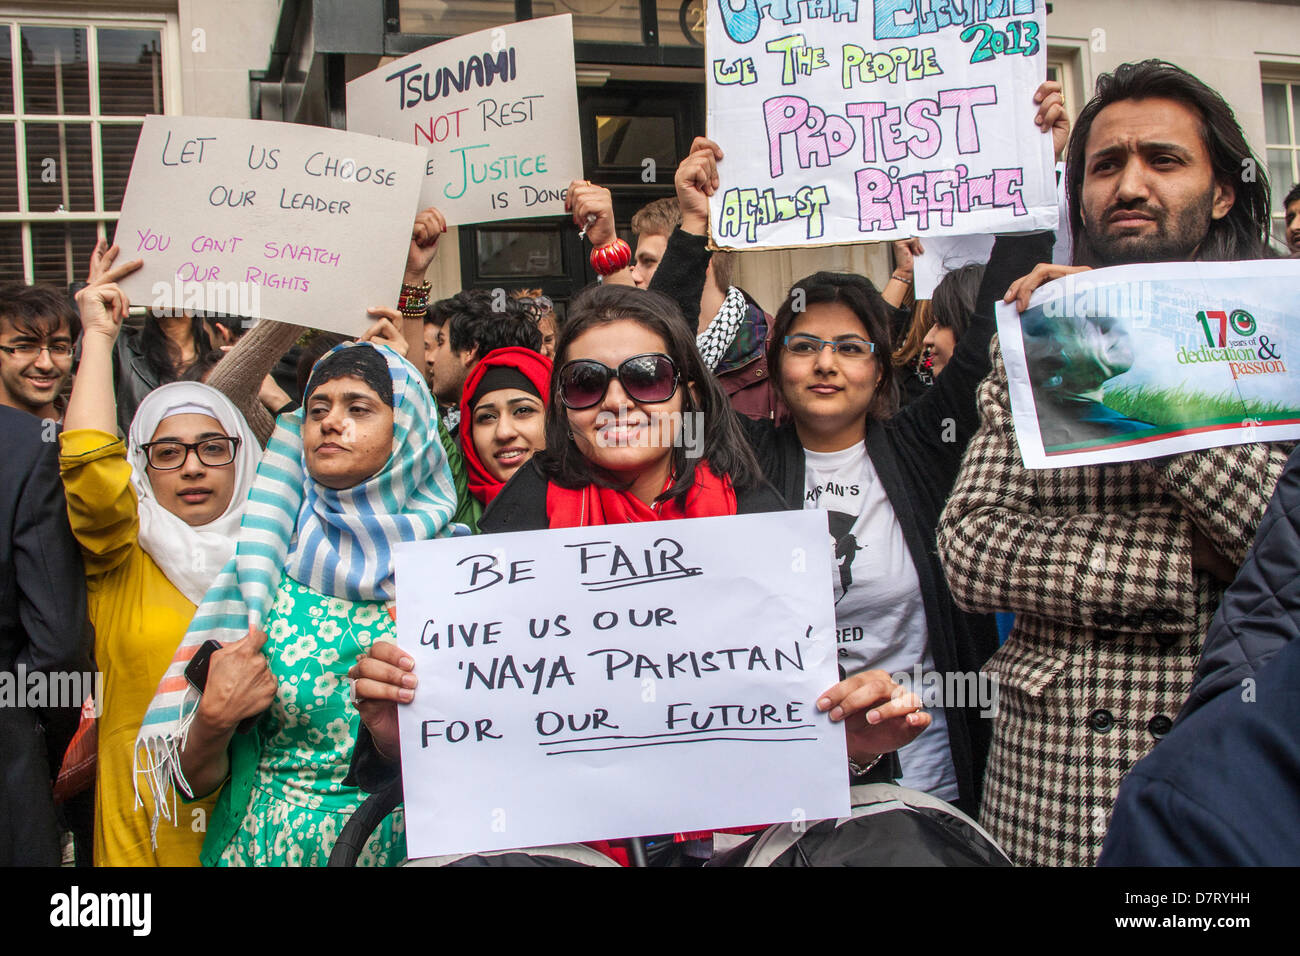 London, UK. 13th May, 2013. Pakistanis protesting against alleged election rigging. Credit: Paul Davey/Alamy Live News Stock Photo